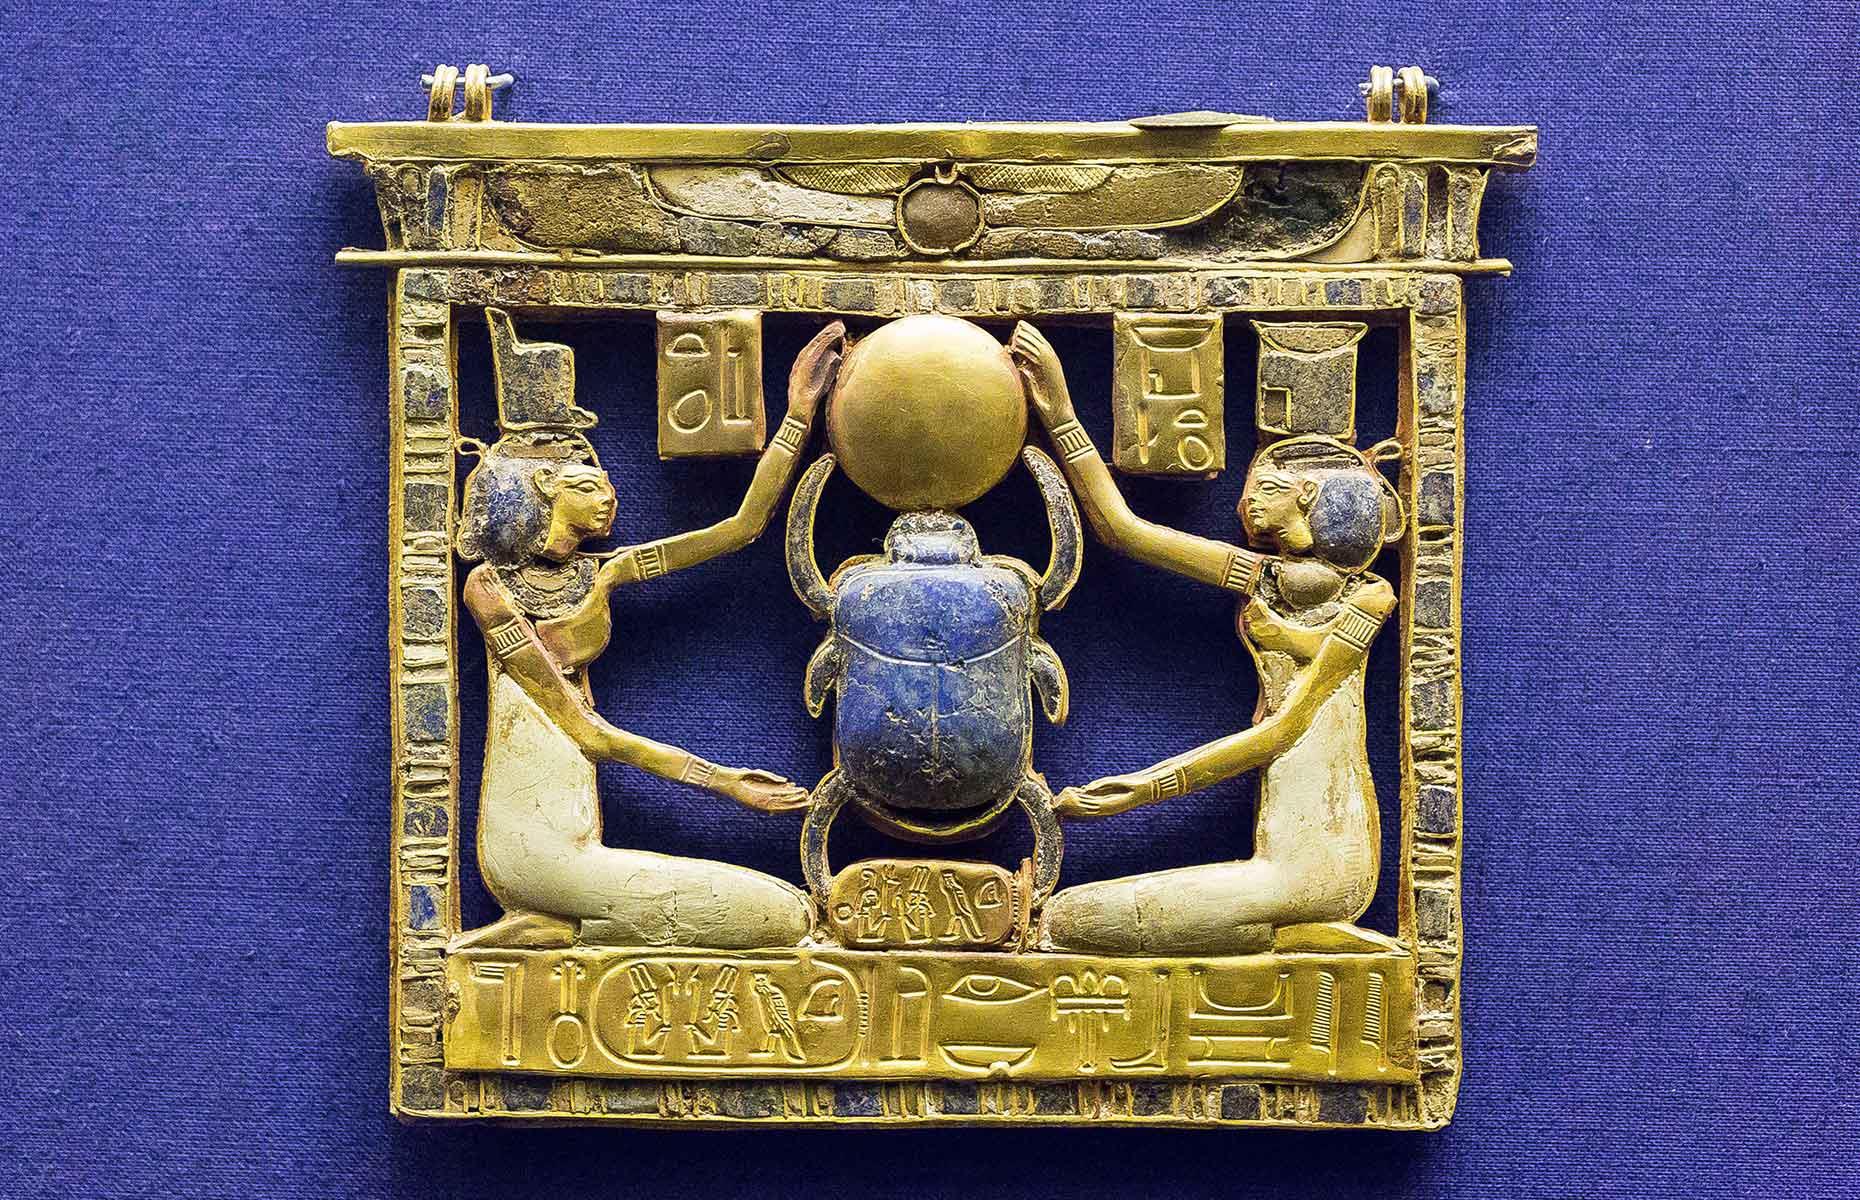 <p>Discovered inside the tomb of king Amenemope (a 21st Dynasty pharaoh) was this detailed pectoral brooch. At the centre <a href="https://egypt-museum.com/pectoral-of-king-amenemope/">is a lapis lazuli scarab</a> touching the golden sun disc, representing rebirth. The scarab is flanked by the goddesses Isis and Nephthys, who protected the wearer, while along the bottom runs a cartouche, an inscription of the king's name. </p>  <p><a href="https://www.loveexploring.com/galleries/153895/hidden-bunkers-and-abandoned-stations-secrets-of-the-london-underground?page=1"><strong>Now we reveal the secrets of the London Underground</strong></a></p>